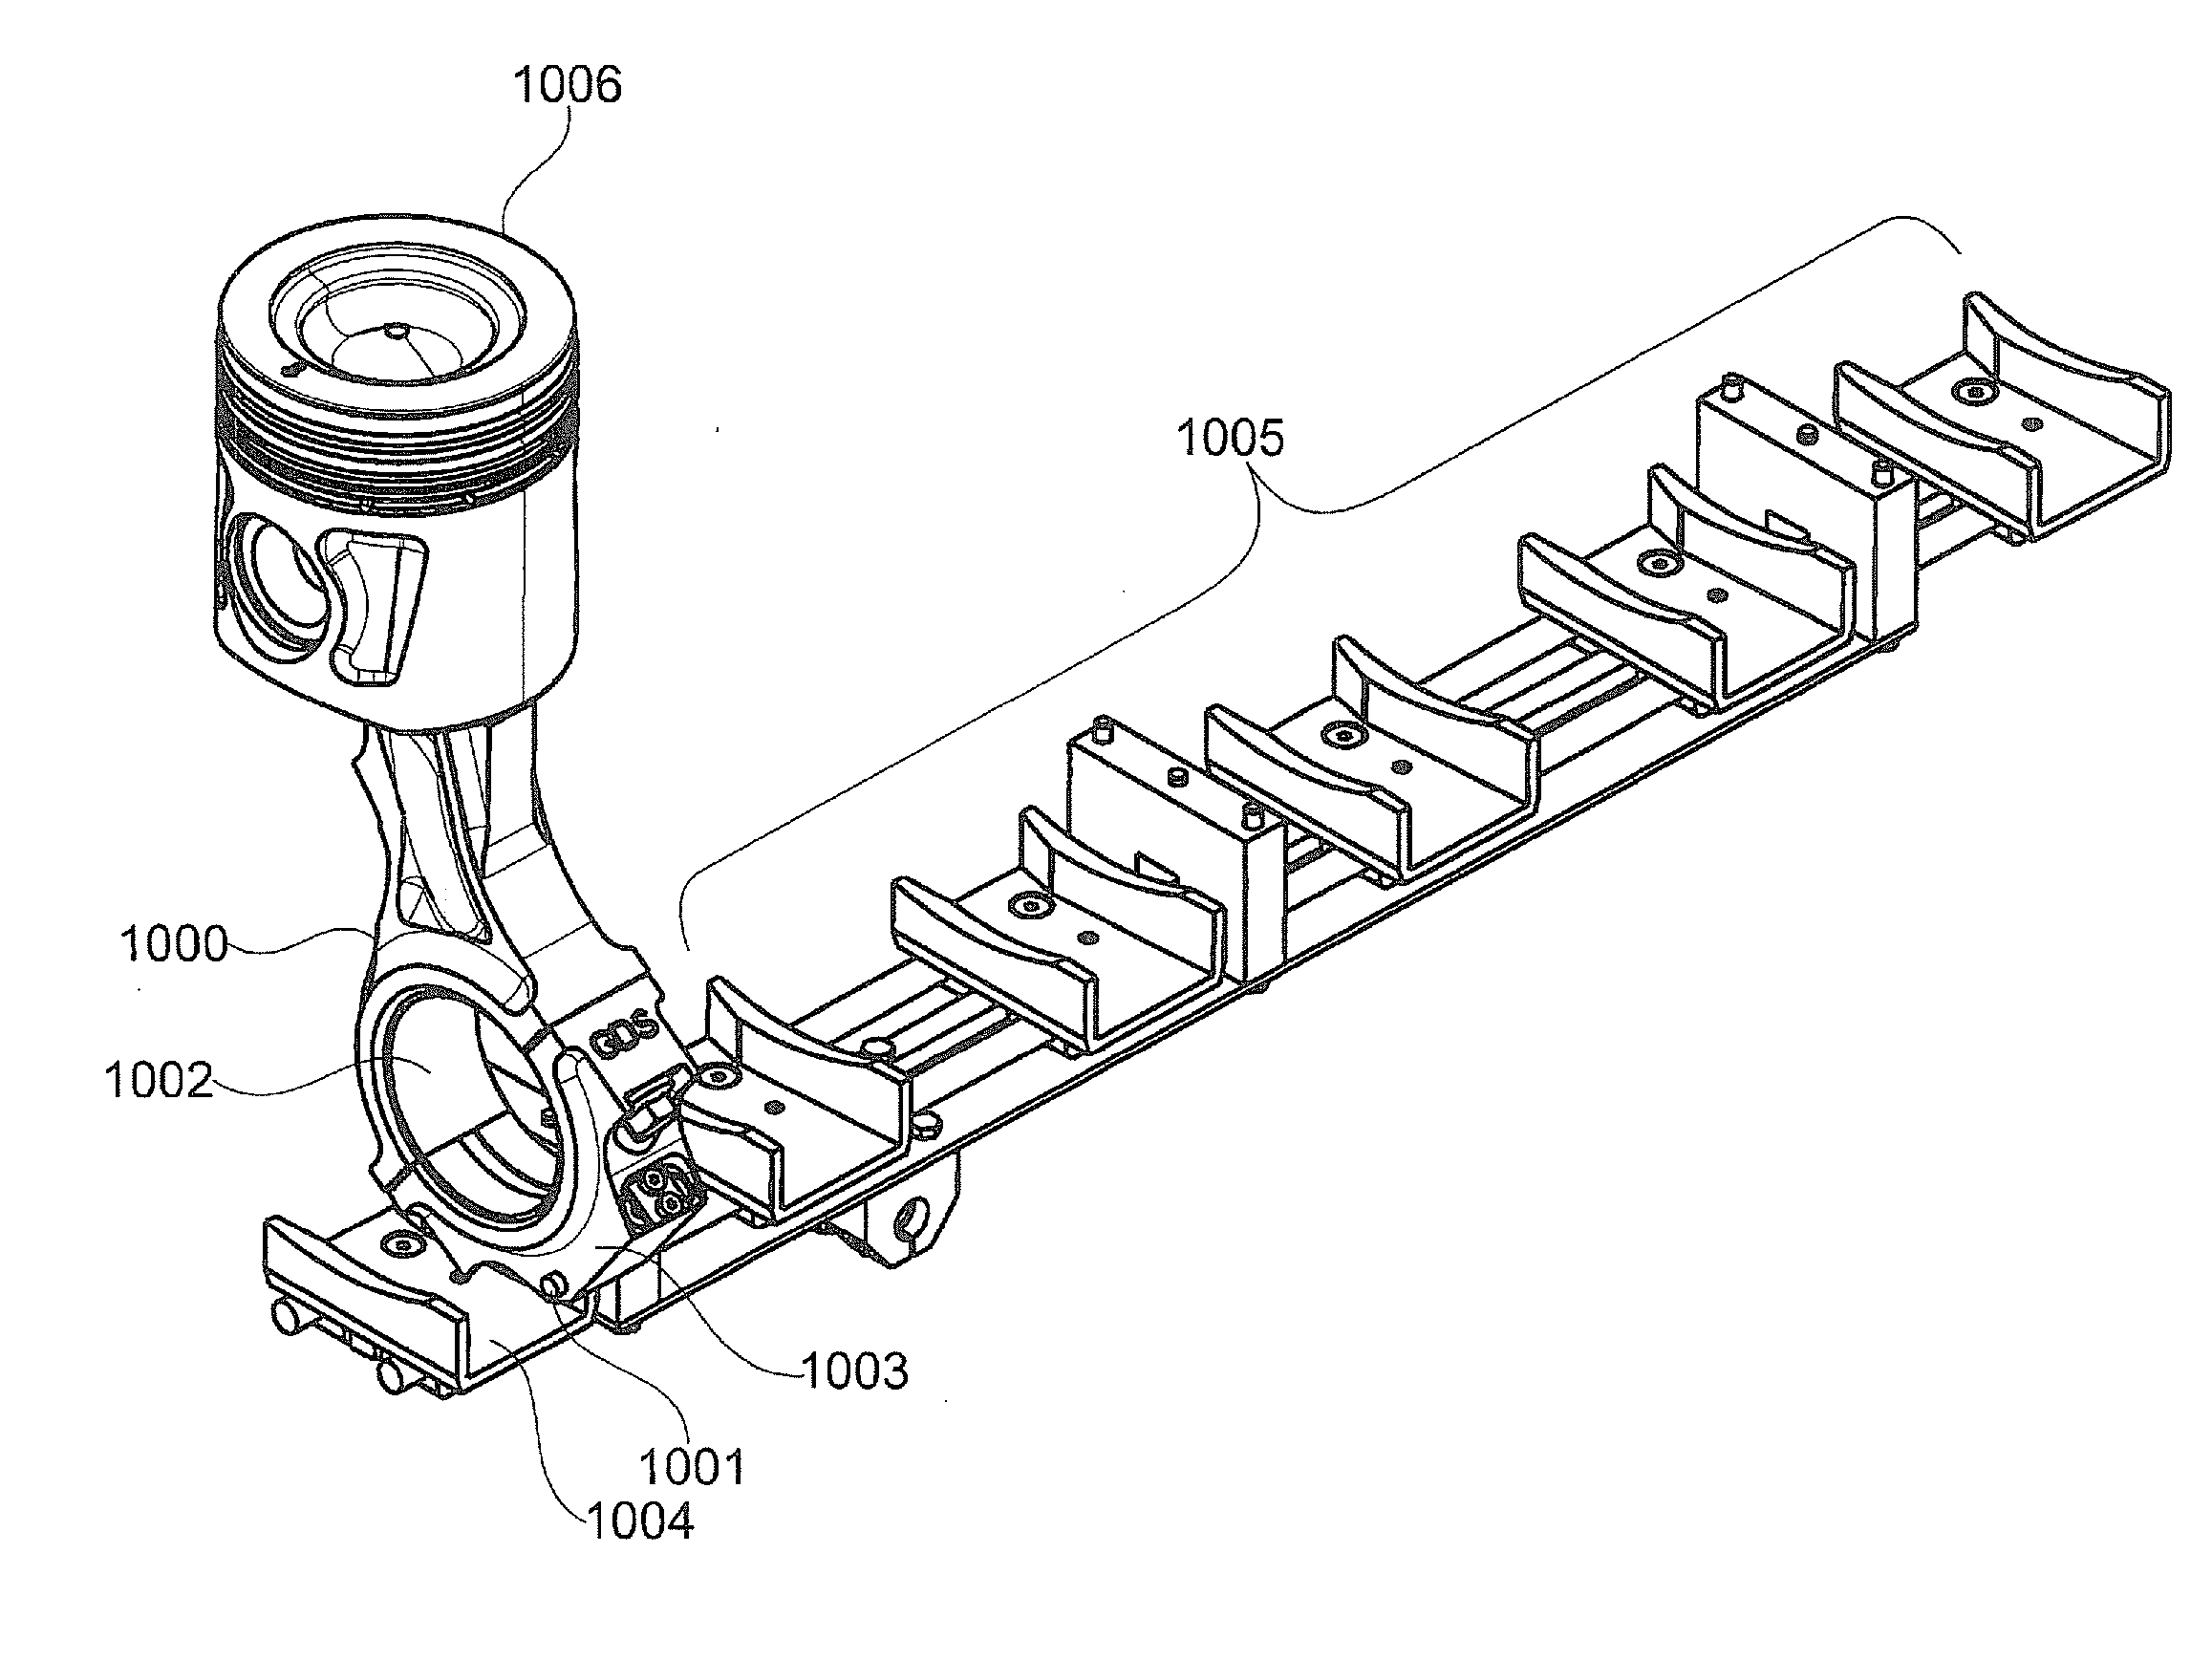 Actuating unit for variable power plant components